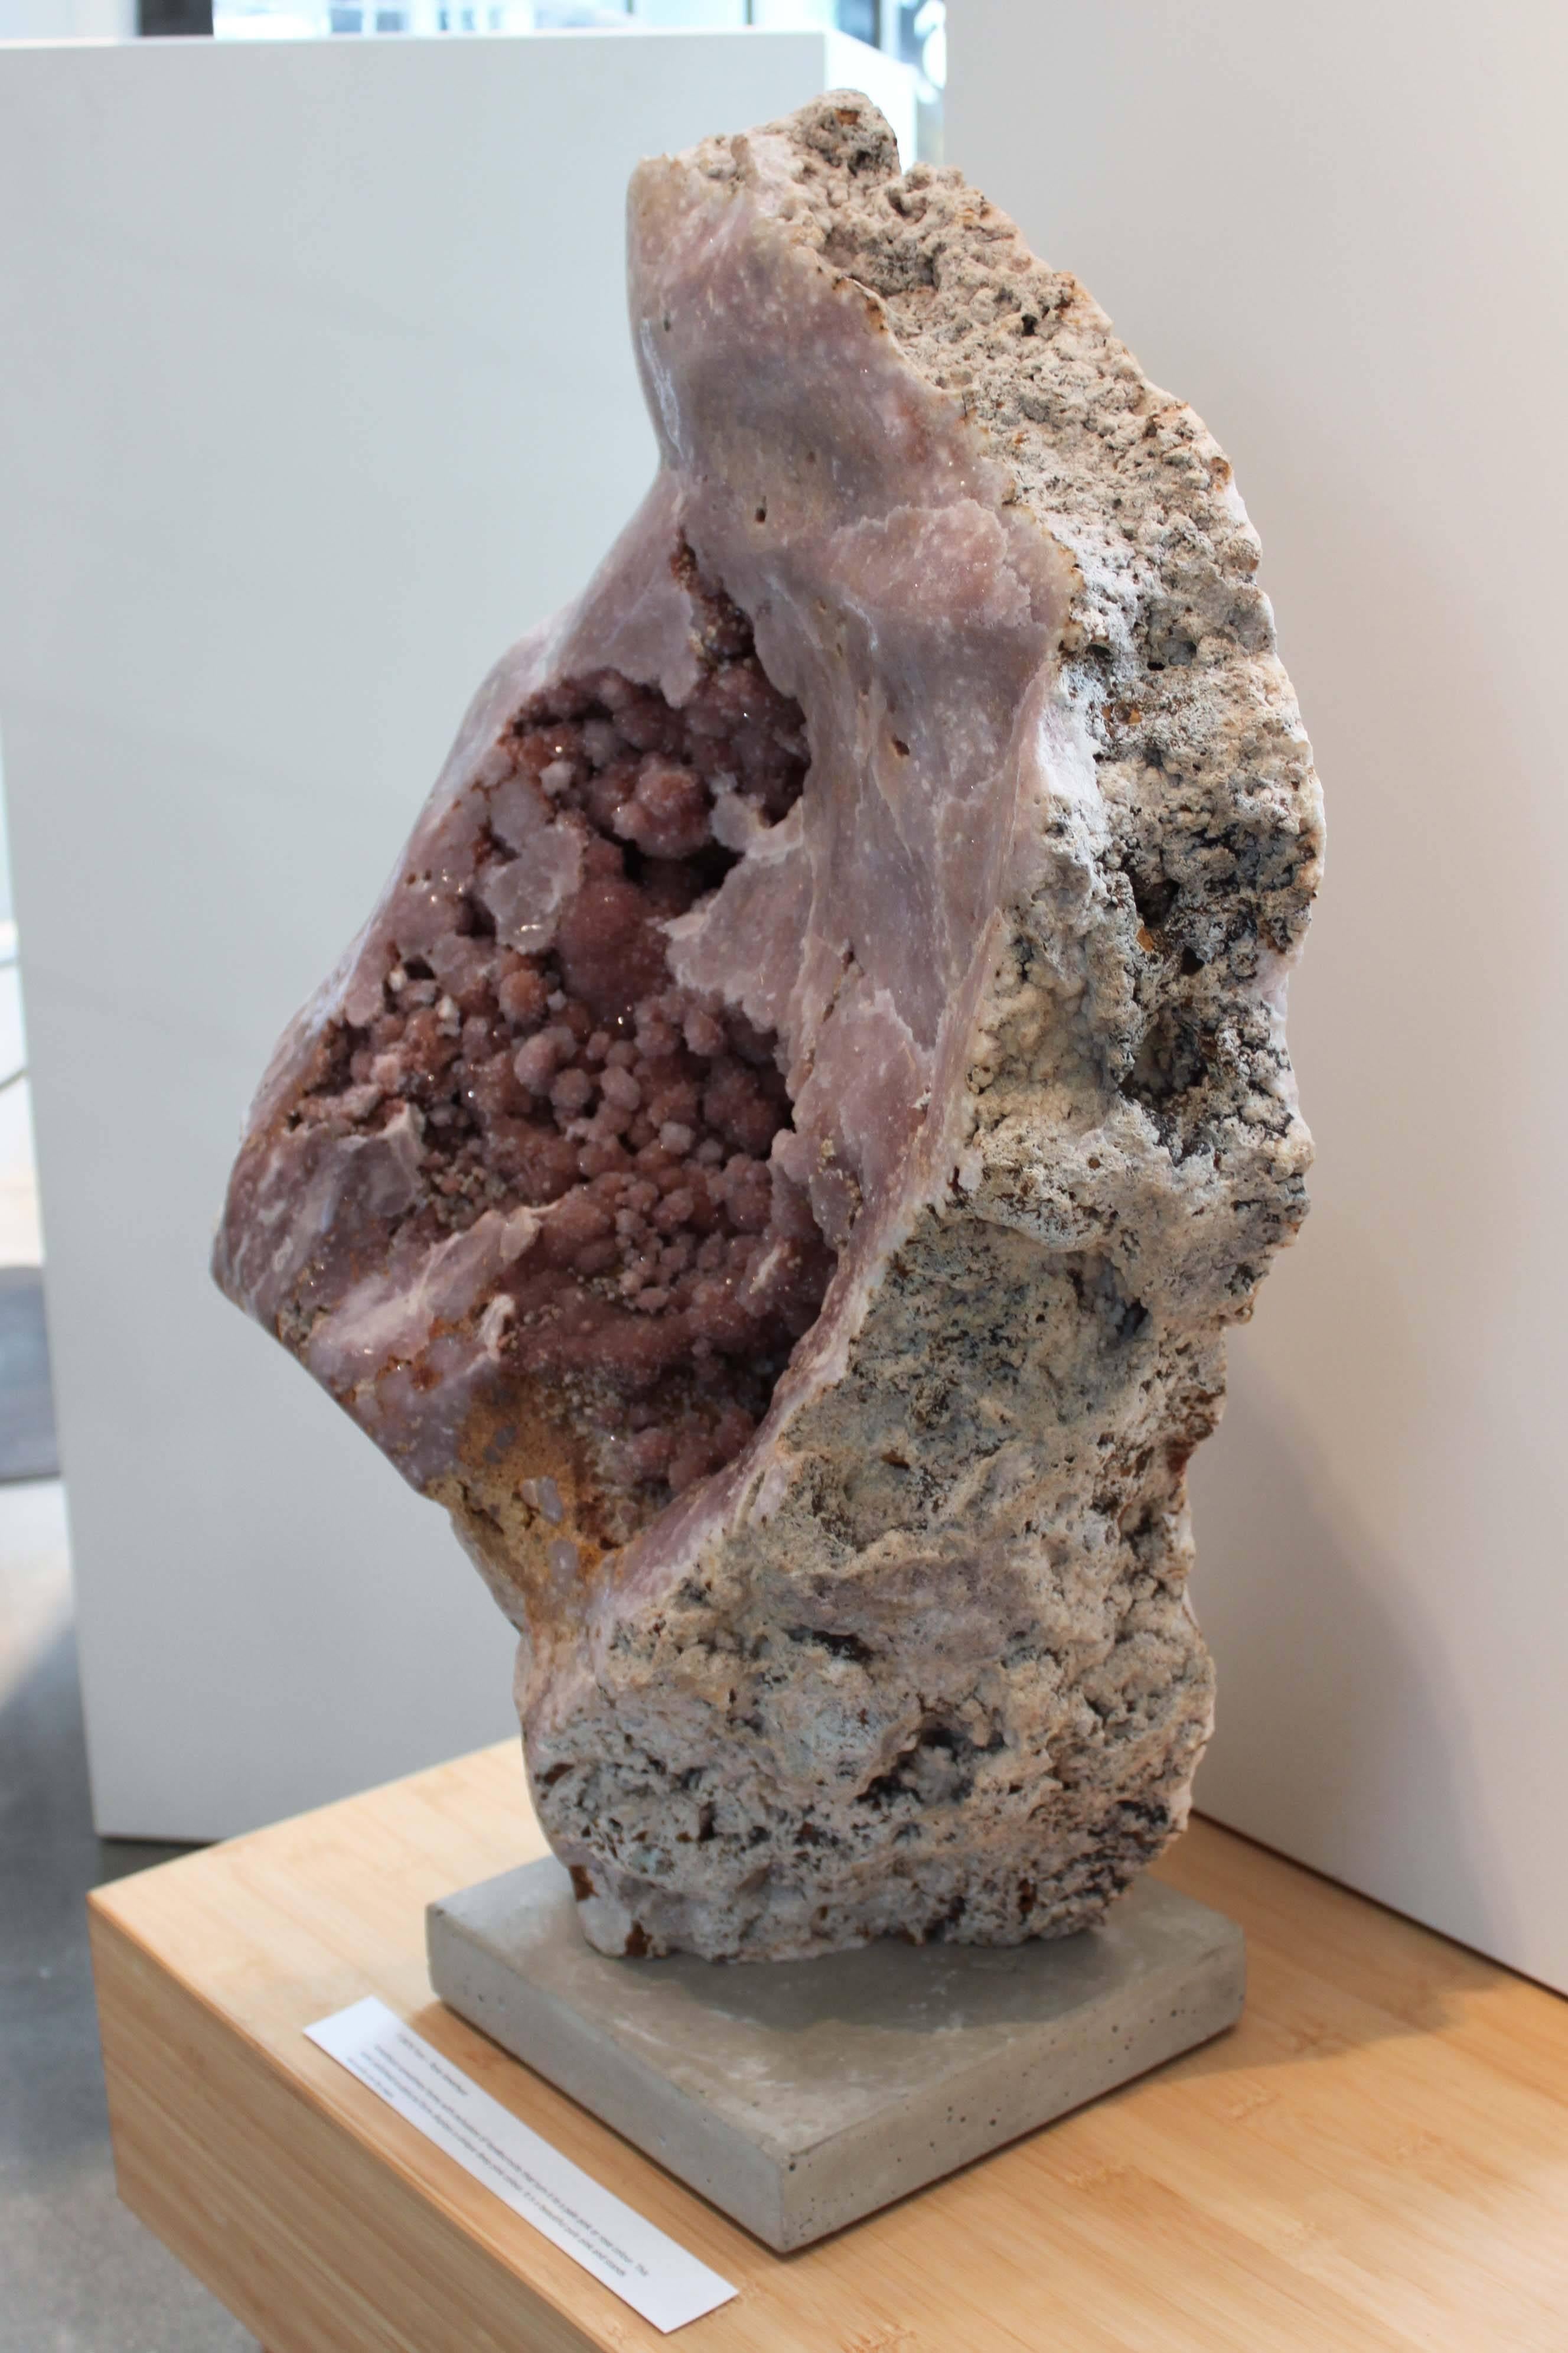 Amethyst sometimes forms with inclusions of lepidocrocite that turn it to a pale pink or rose color. This semi-polished sculptural form displays a unique deep-pink colour and stands securely on it’s own.